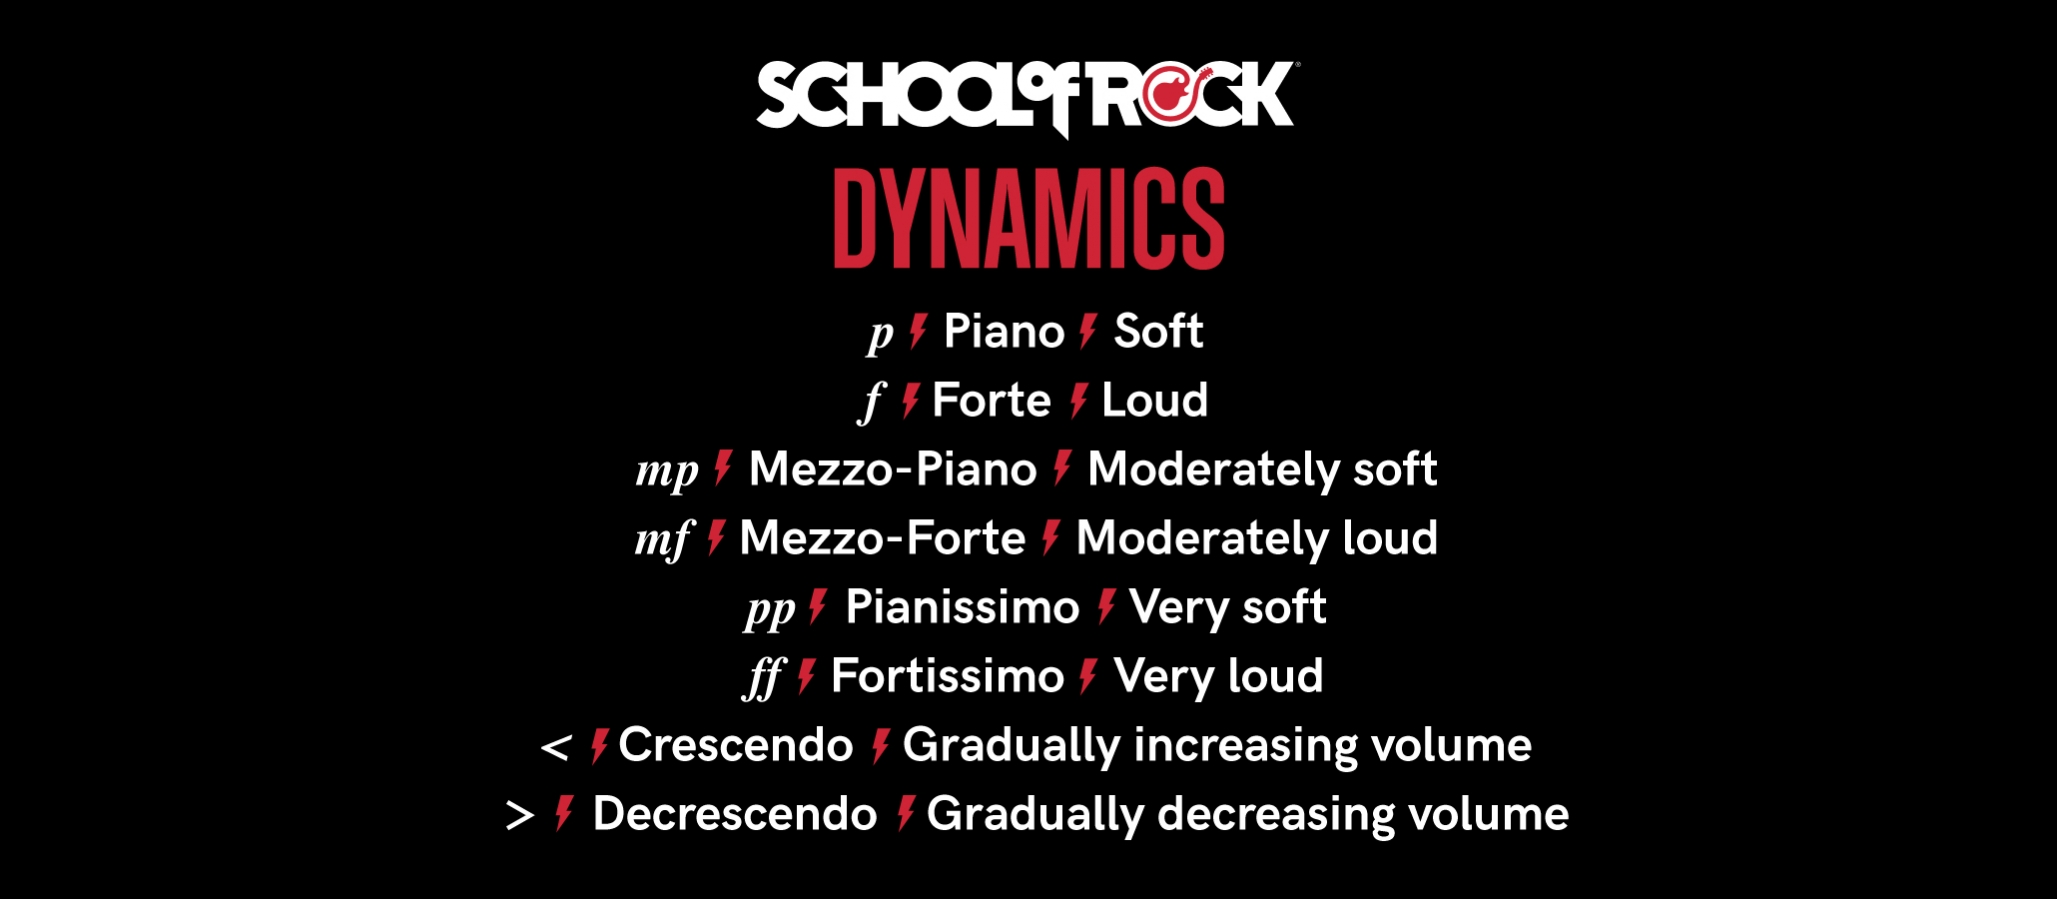 Infographic of dynamics